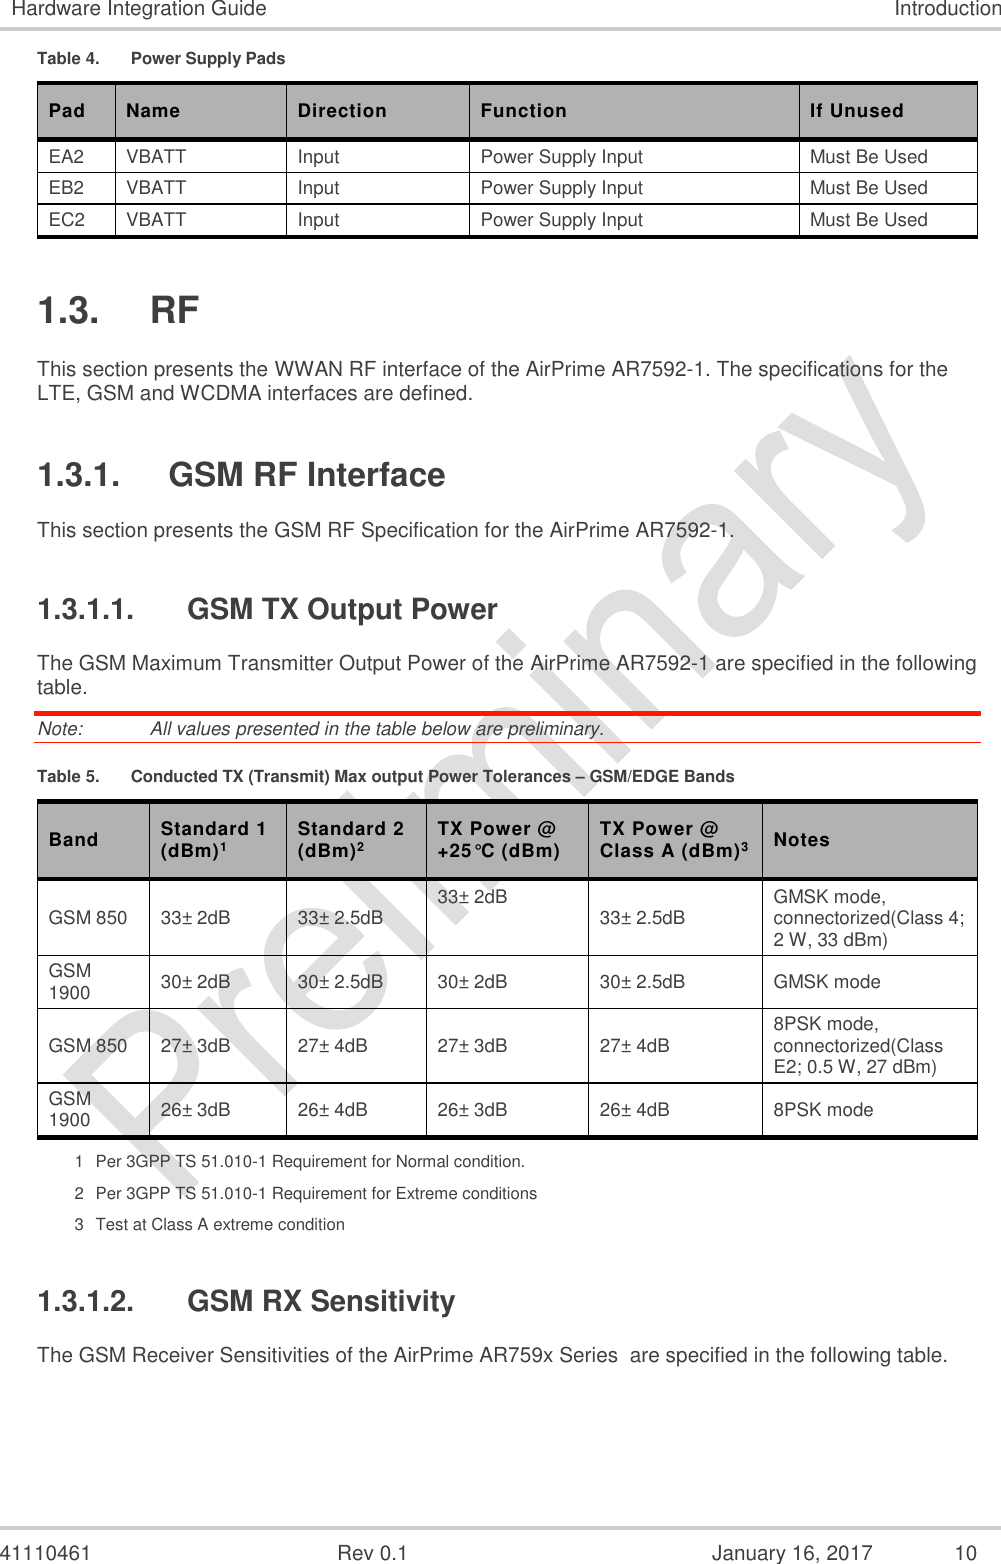  41110461  Rev 0.1  January 16, 2017  10 Hardware Integration Guide Introduction Table 4.  Power Supply Pads Pad Name Direction Function If Unused EA2 VBATT Input Power Supply Input Must Be Used EB2 VBATT Input Power Supply Input Must Be Used EC2 VBATT Input Power Supply Input Must Be Used 1.3.  RF This section presents the WWAN RF interface of the AirPrime AR7592-1. The specifications for the LTE, GSM and WCDMA interfaces are defined. 1.3.1.  GSM RF Interface This section presents the GSM RF Specification for the AirPrime AR7592-1. 1.3.1.1.  GSM TX Output Power The GSM Maximum Transmitter Output Power of the AirPrime AR7592-1 are specified in the following table. Note:   All values presented in the table below are preliminary. Table 5.  Conducted TX (Transmit) Max output Power Tolerances – GSM/EDGE Bands Band Standard 1 (dBm)1 Standard 2 (dBm)2 TX Power @ +25°C (dBm) TX Power @ Class A (dBm)3 Notes GSM 850 33± 2dB 33± 2.5dB 33± 2dB 33± 2.5dB GMSK mode, connectorized(Class 4; 2 W, 33 dBm) GSM 1900 30± 2dB 30± 2.5dB 30± 2dB 30± 2.5dB GMSK mode GSM 850 27± 3dB 27± 4dB 27± 3dB 27± 4dB 8PSK mode, connectorized(Class E2; 0.5 W, 27 dBm) GSM 1900 26± 3dB 26± 4dB 26± 3dB 26± 4dB 8PSK mode 1  Per 3GPP TS 51.010-1 Requirement for Normal condition. 2  Per 3GPP TS 51.010-1 Requirement for Extreme conditions 3  Test at Class A extreme condition 1.3.1.2.  GSM RX Sensitivity The GSM Receiver Sensitivities of the AirPrime AR759x Series  are specified in the following table. 